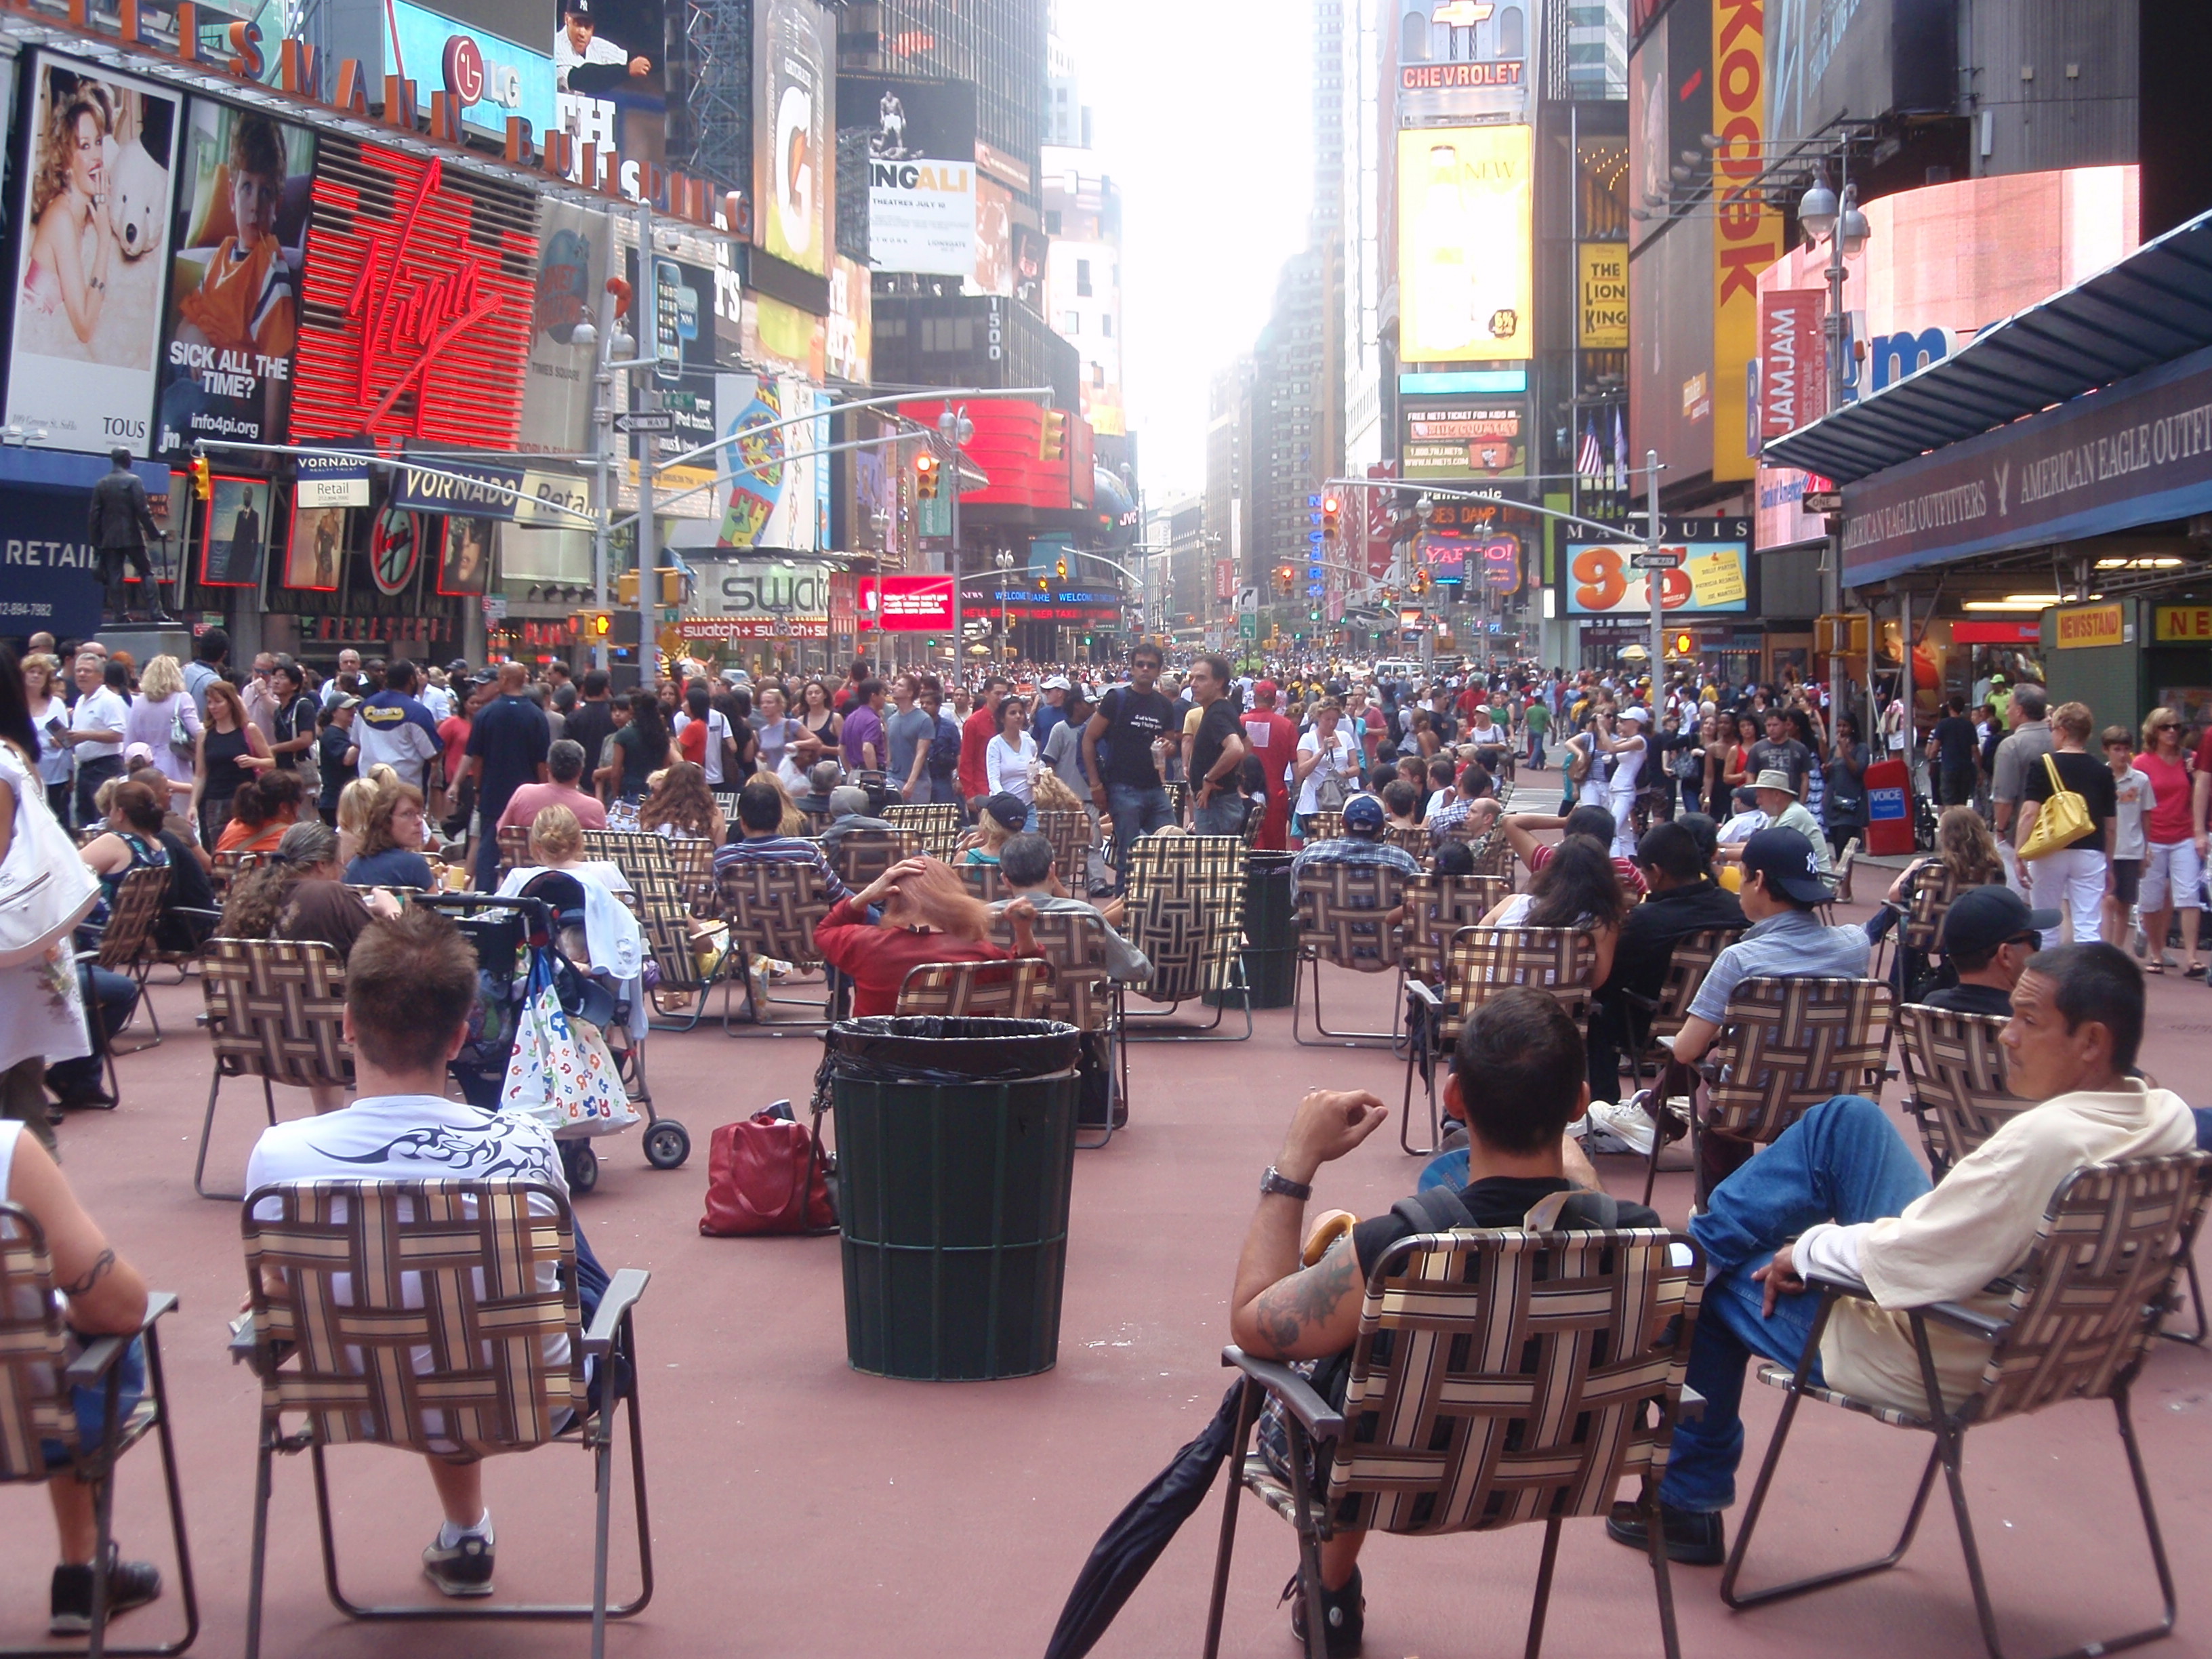 A few bollards and outdoor furniture from Home Depot - et voila! - the new Times Square for people!